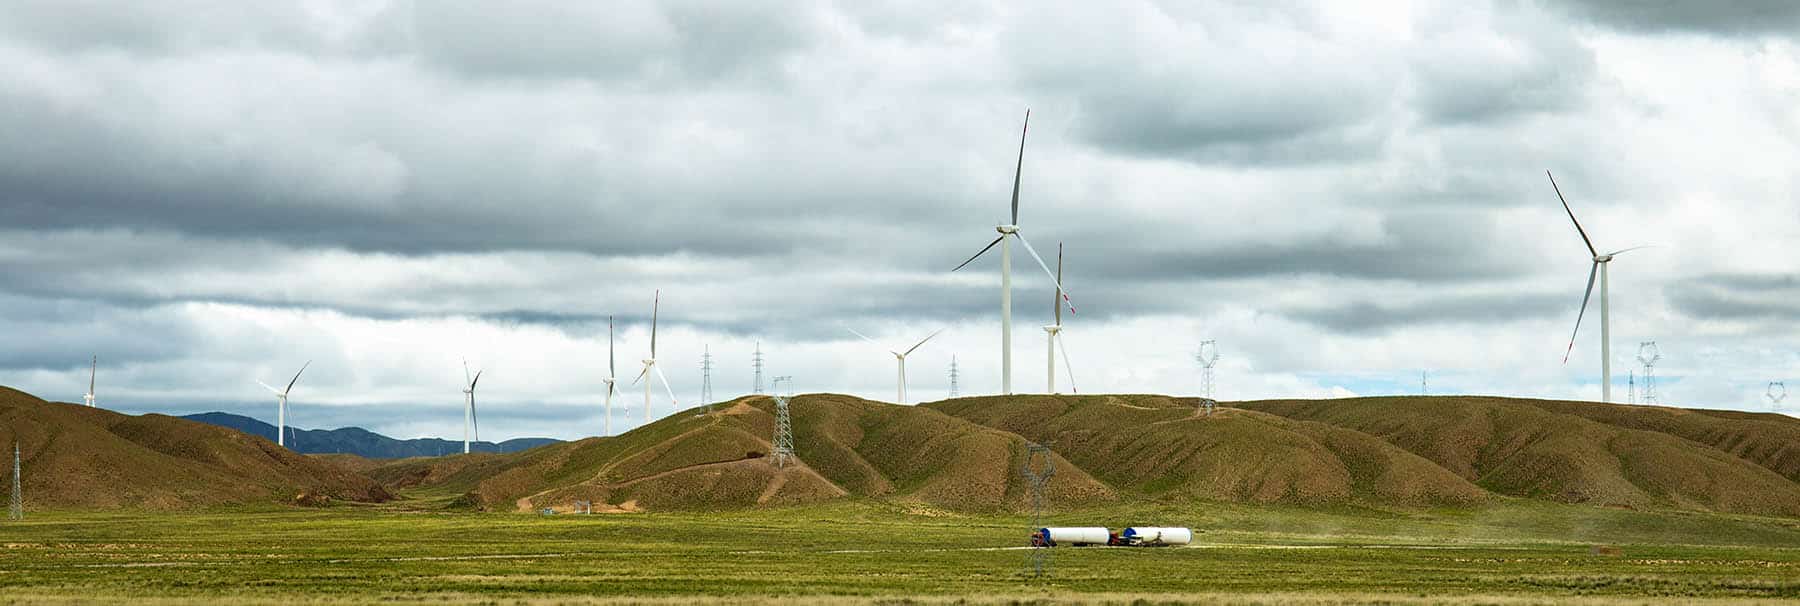 In the wilderness of Qinghai Province in Northwest China, many tall wind turbines continue to use wind energy to generate electricity.